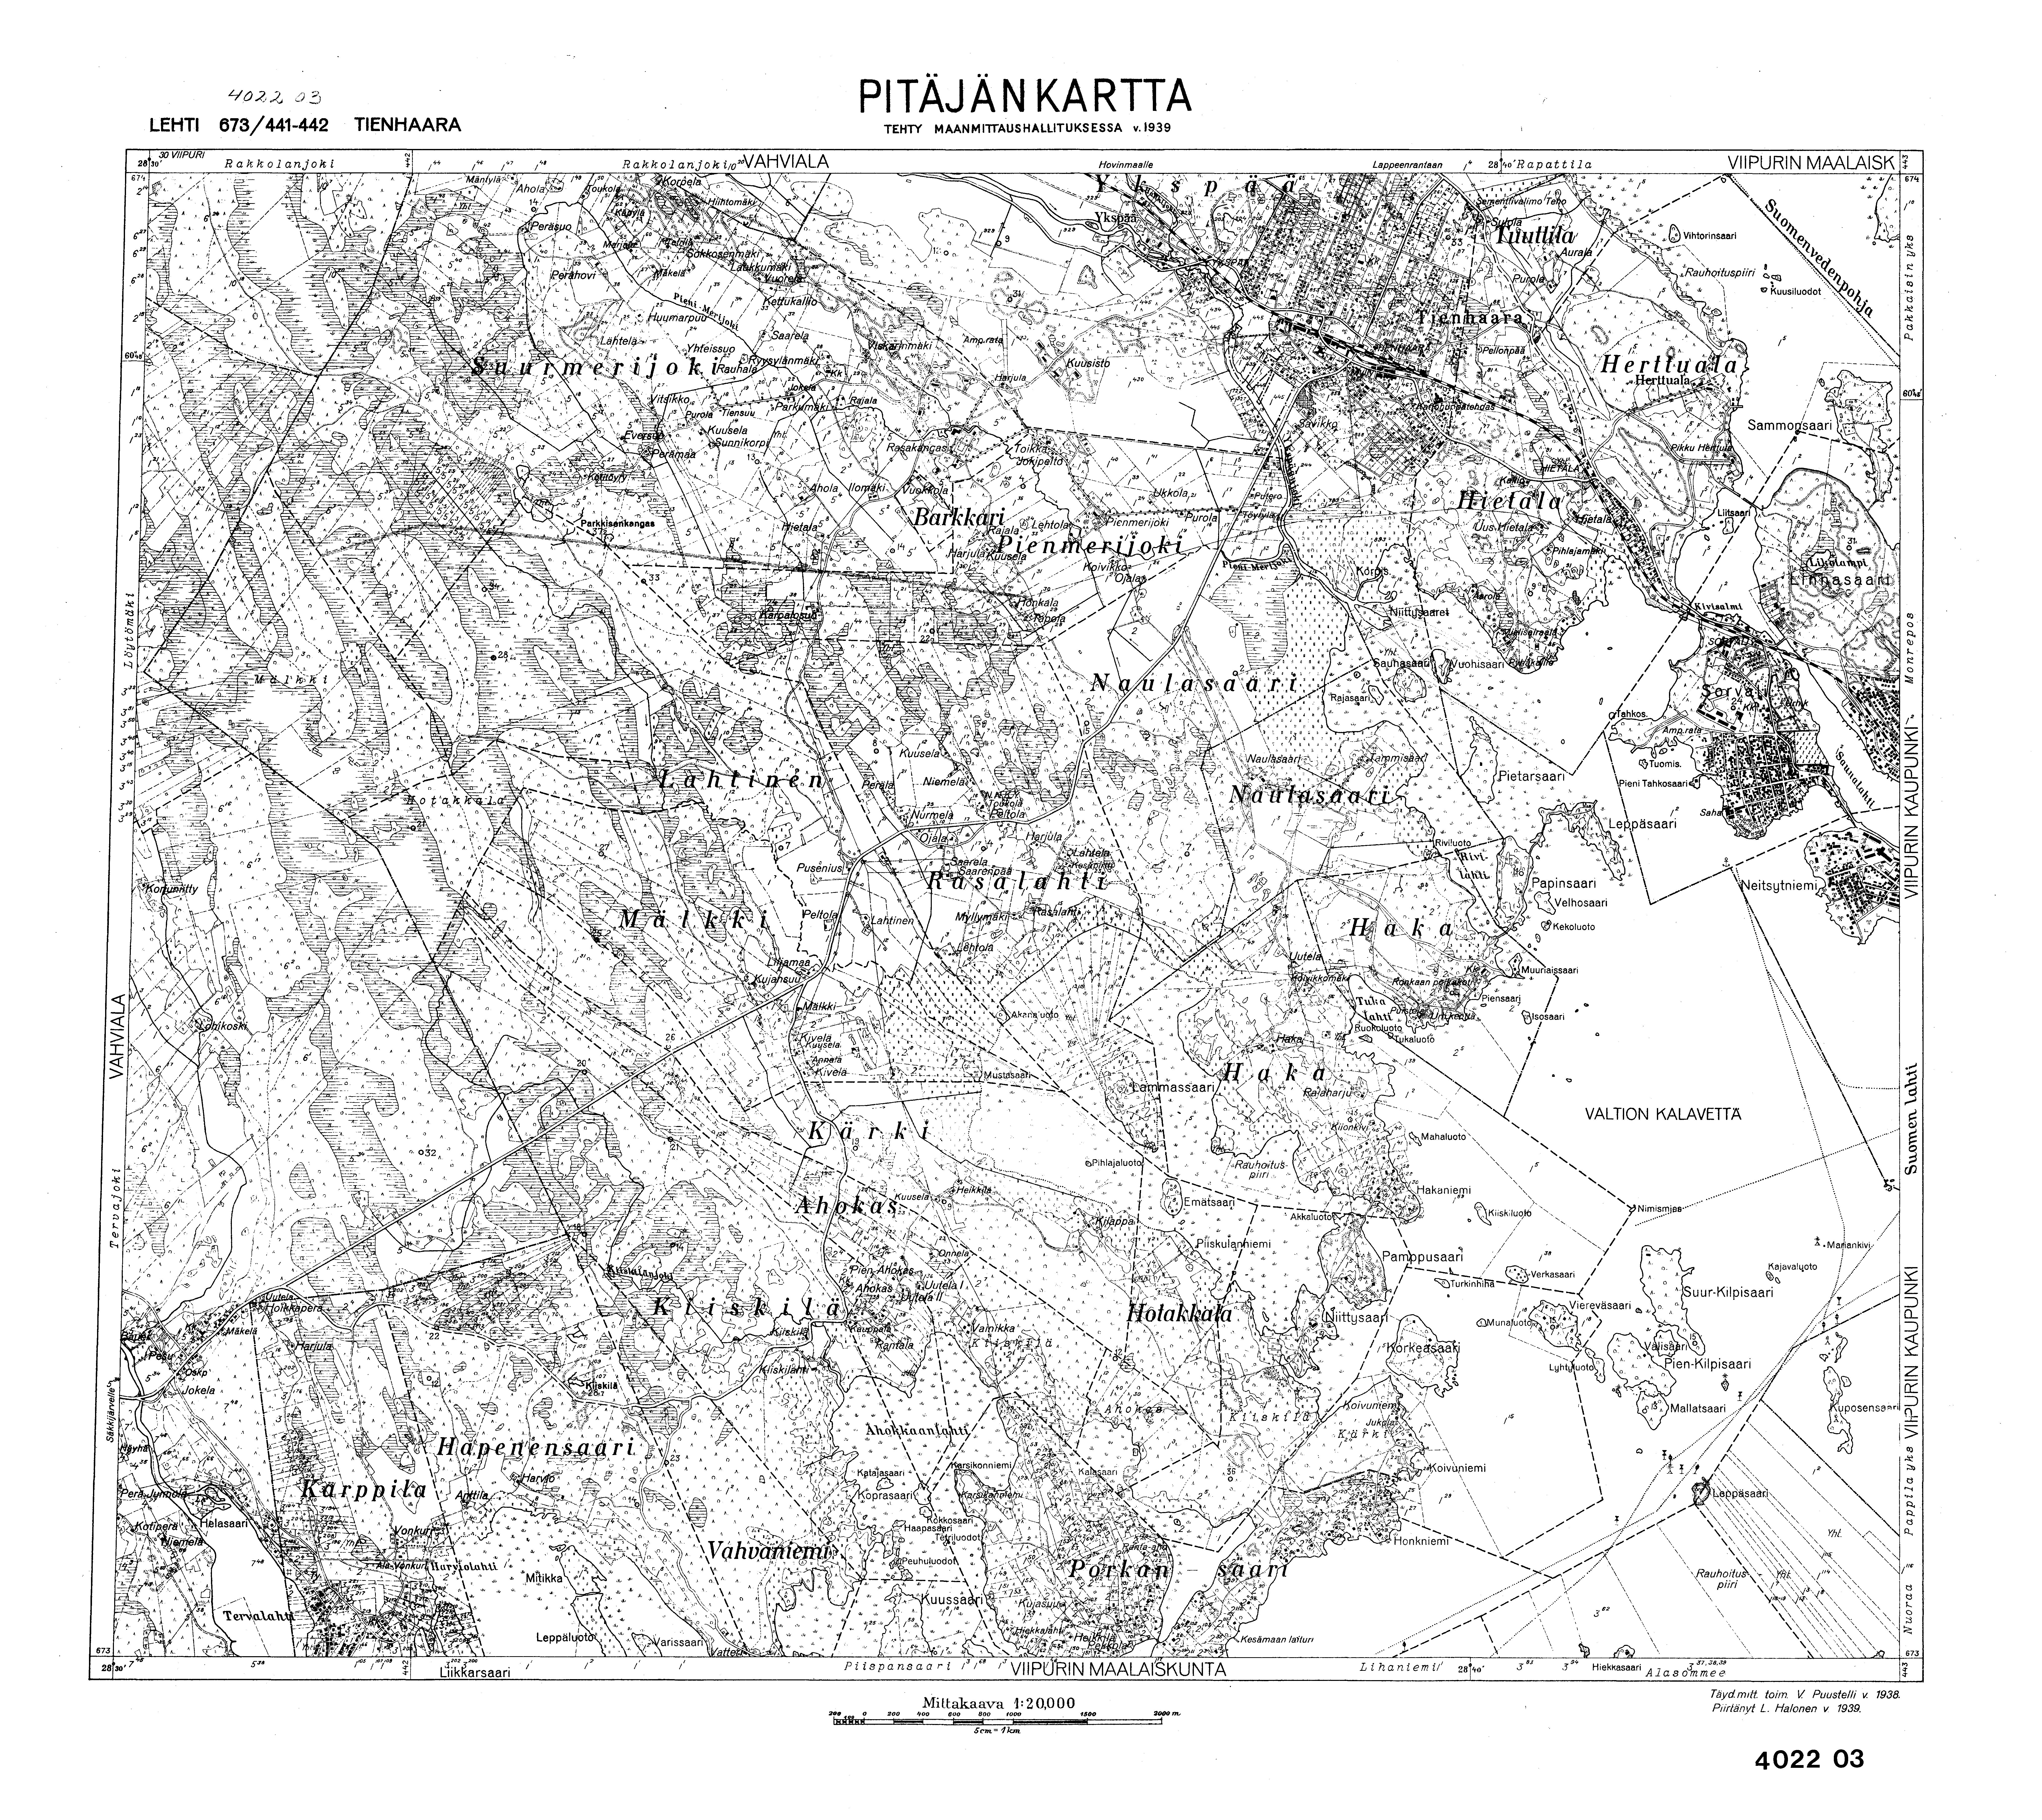 Seleznjovo. Tienhaara. Pitäjänkartta 402203. Parish map from 1939. Use the zooming tool to explore in higher level of detail. Obtain as a quality print or high resolution image